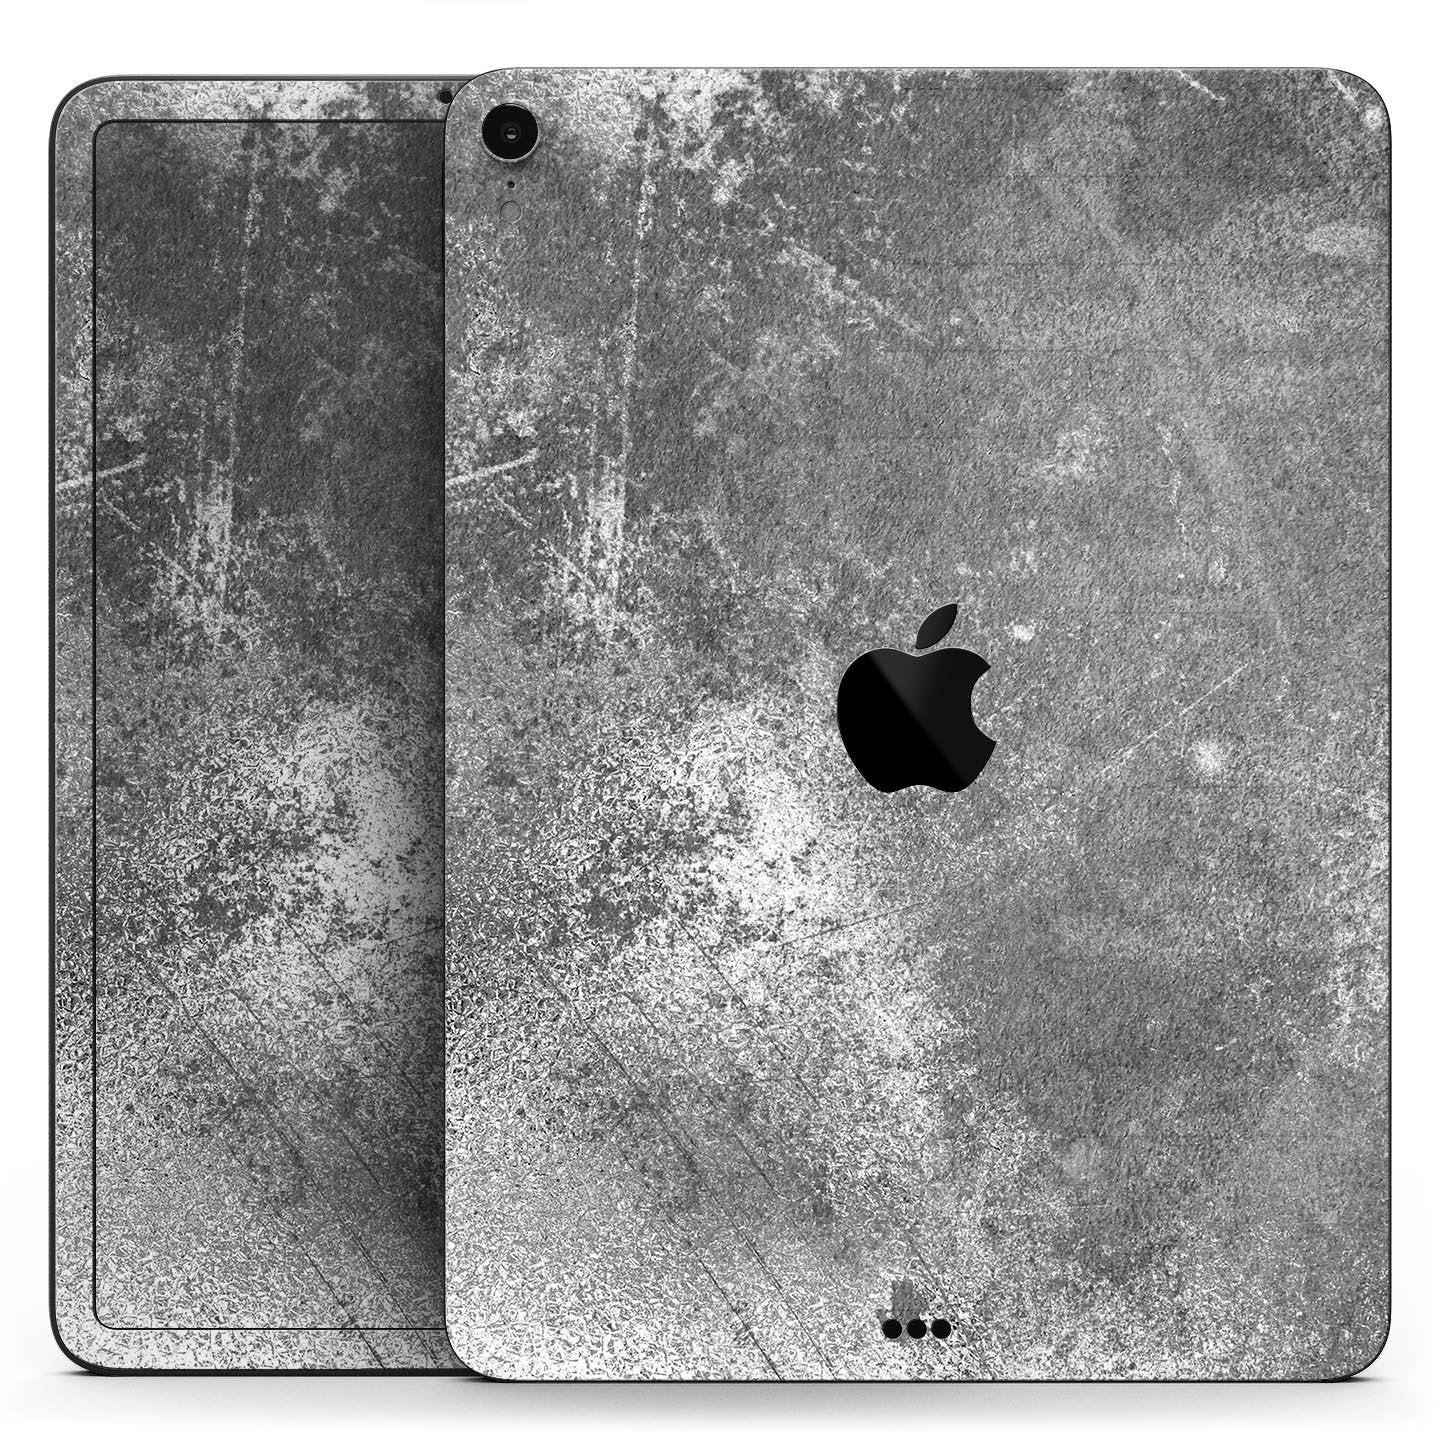 Distressed Silver Texture v2 - Full Body Skin Decal for the Apple iPad